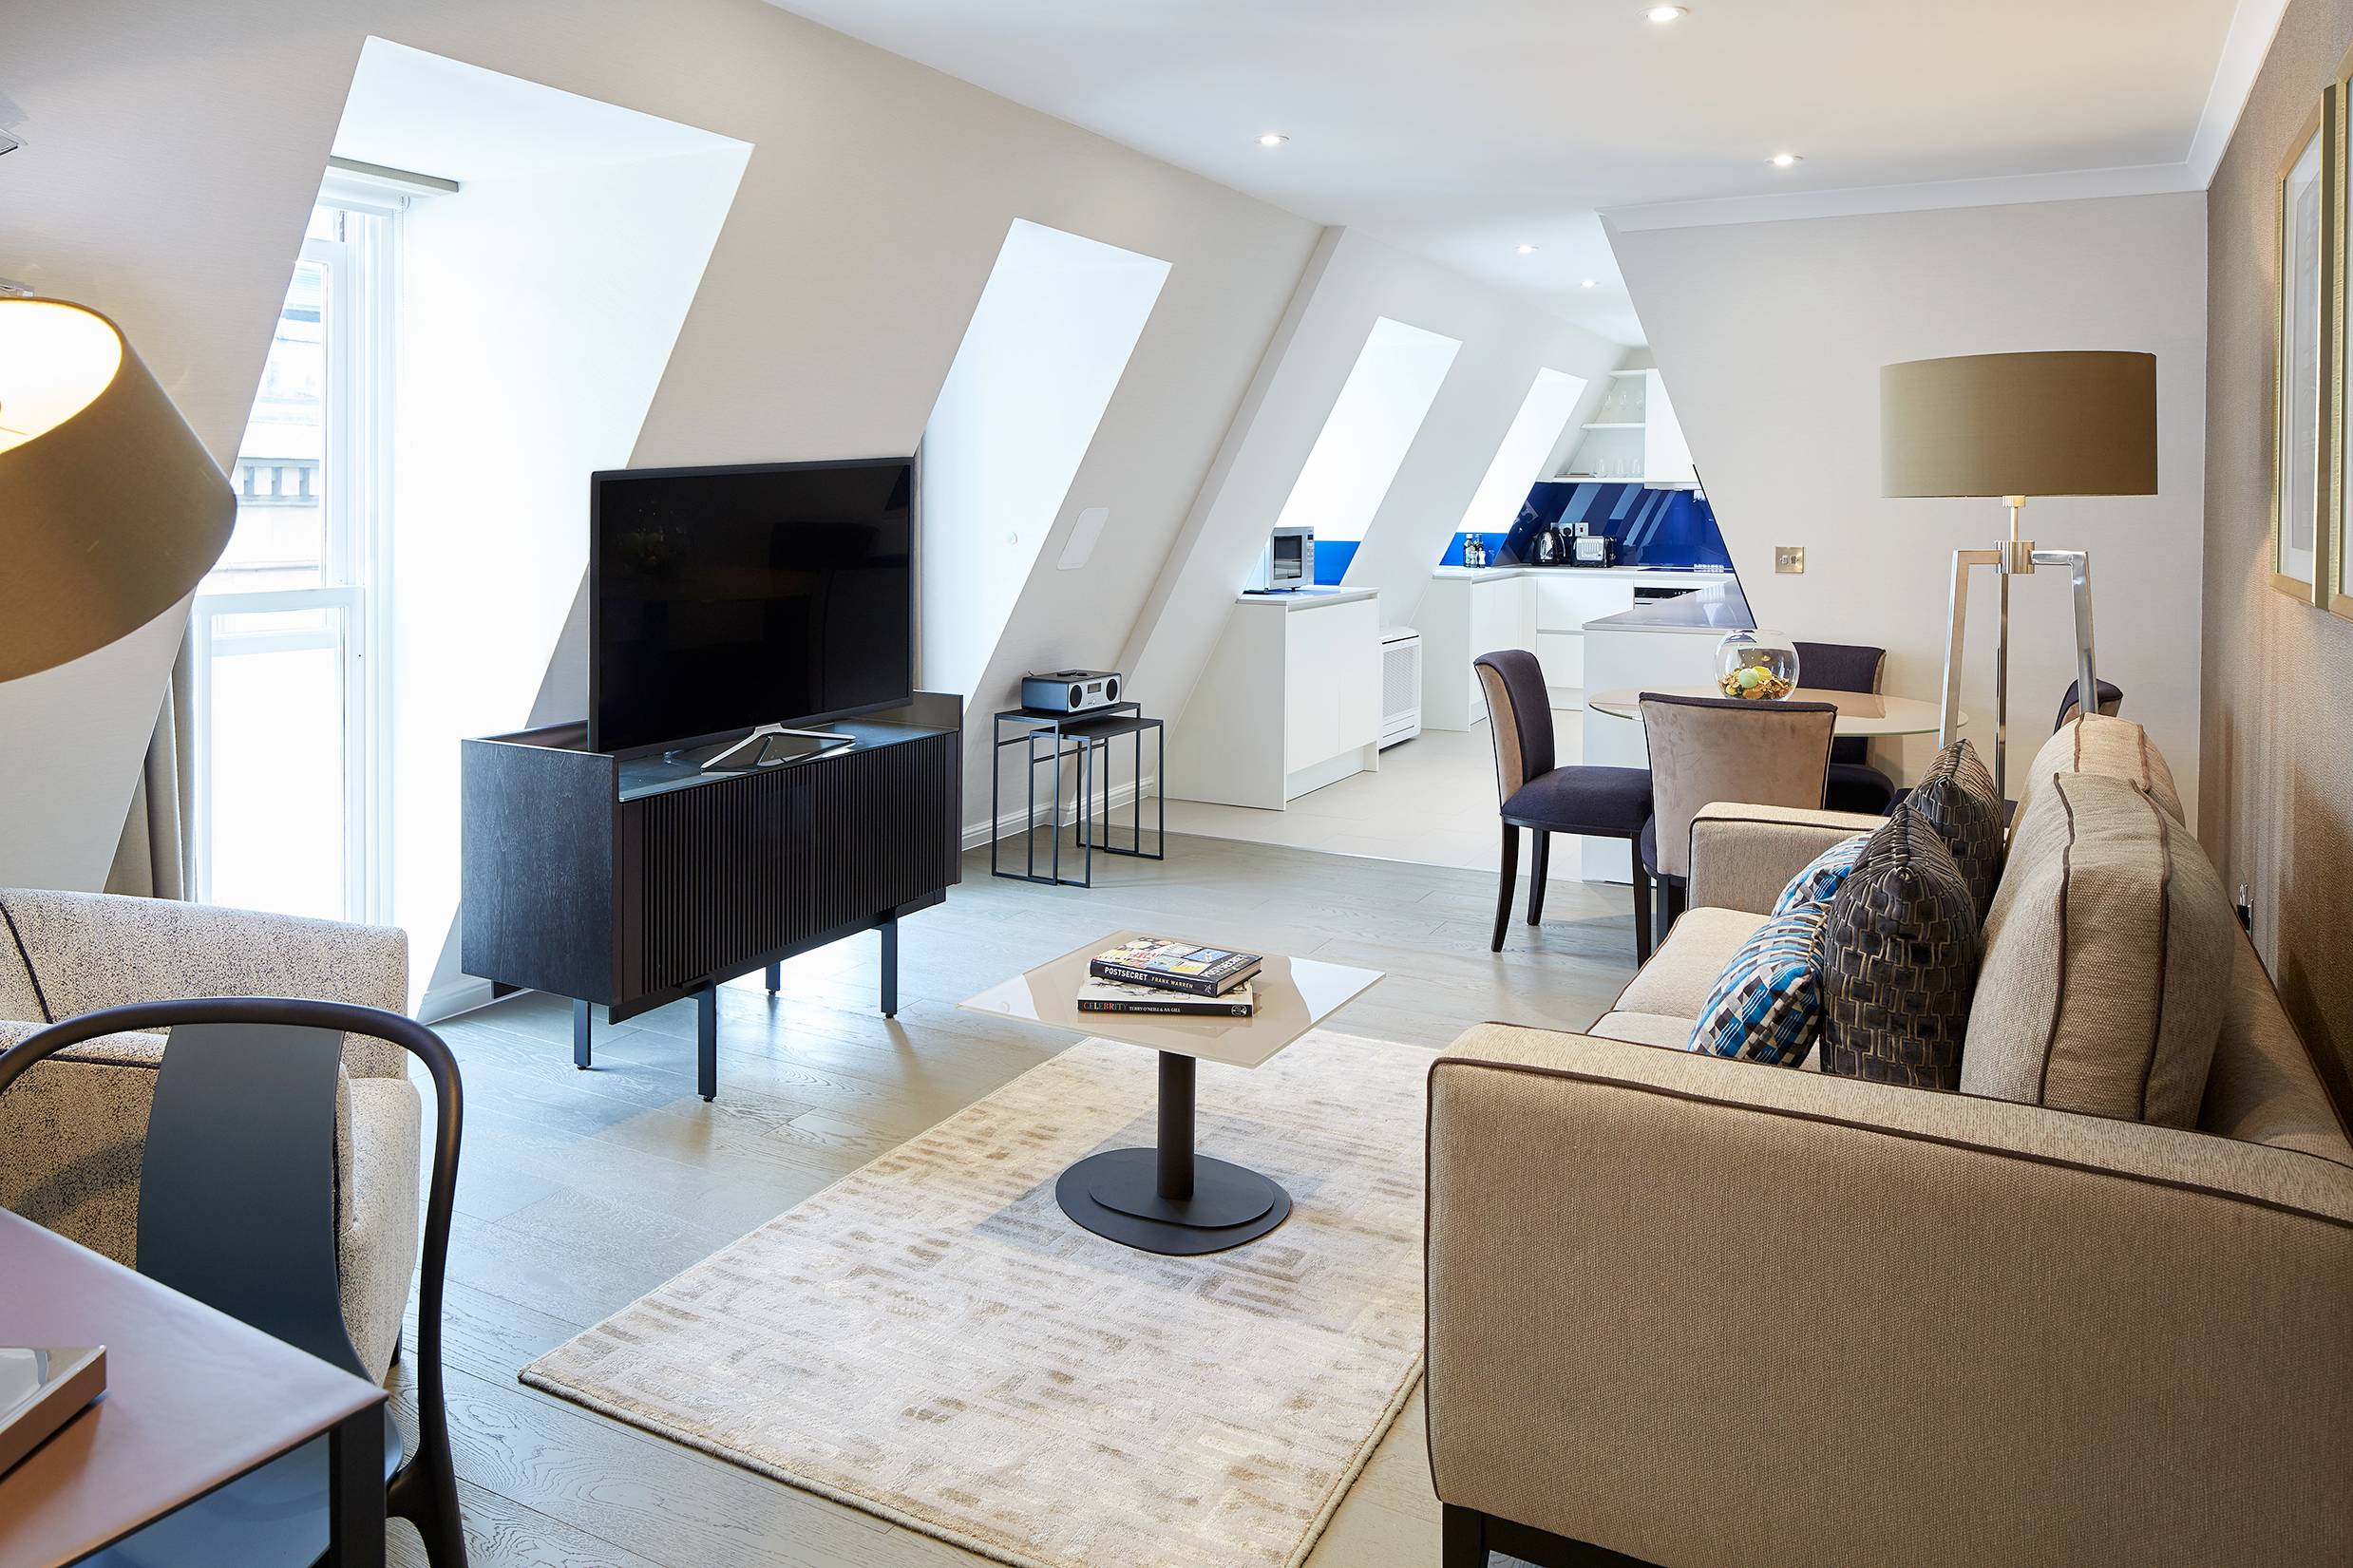 Luxury One-Bedroom Serviced Apartment with premium amenities in the heart of the City of London